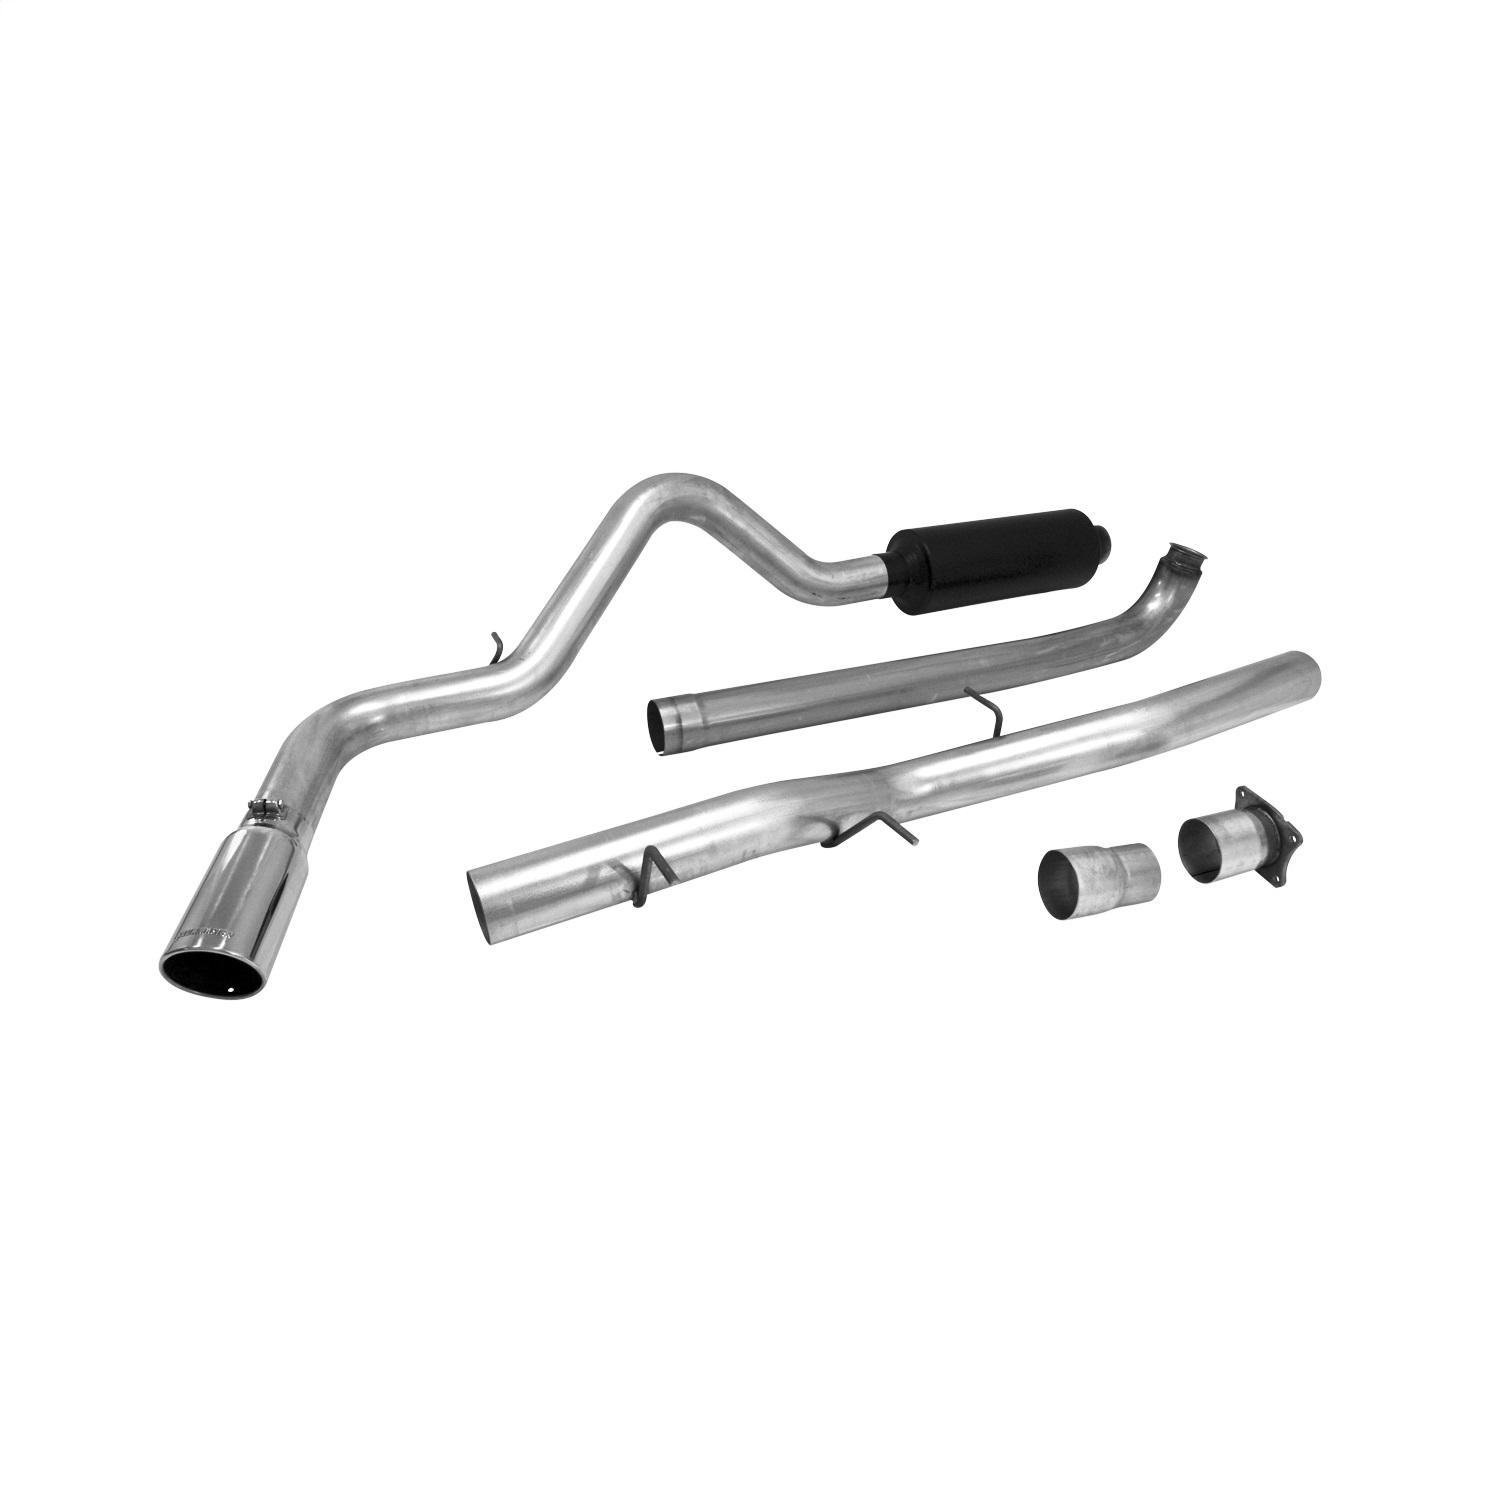 Flowmaster Flowmaster 817542 Force II Downpipe Back Exhaust System